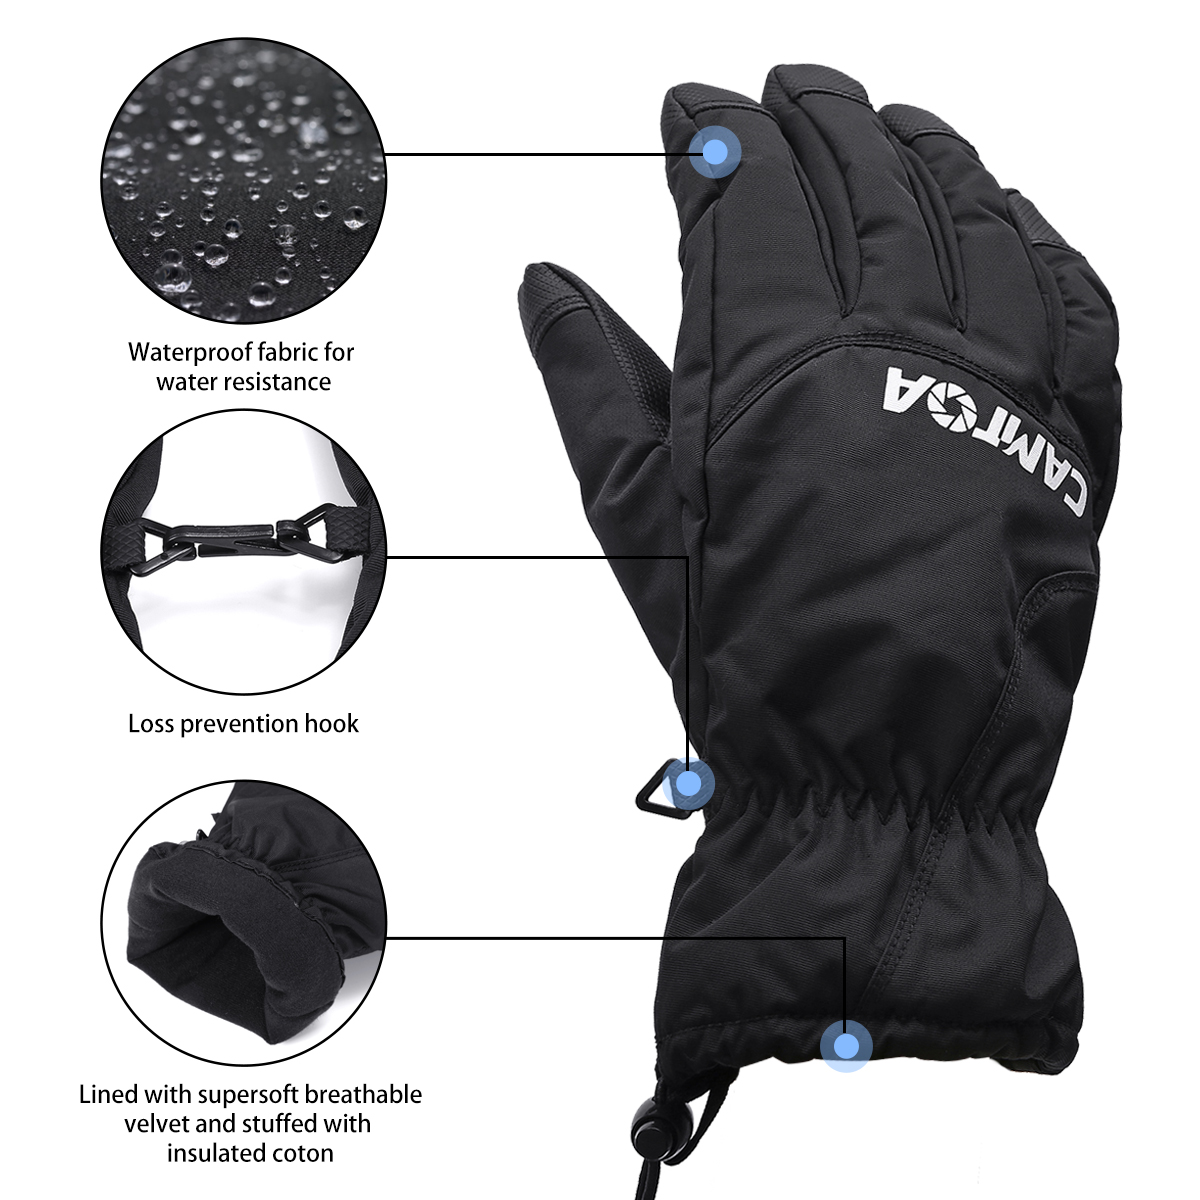 CAMTOA-Winter-Skiing-Gloves-3M-Thinsulate-Warm-Waterproof-Breathable-Snow-Gloves-for-Men-and-Women-1397724-3